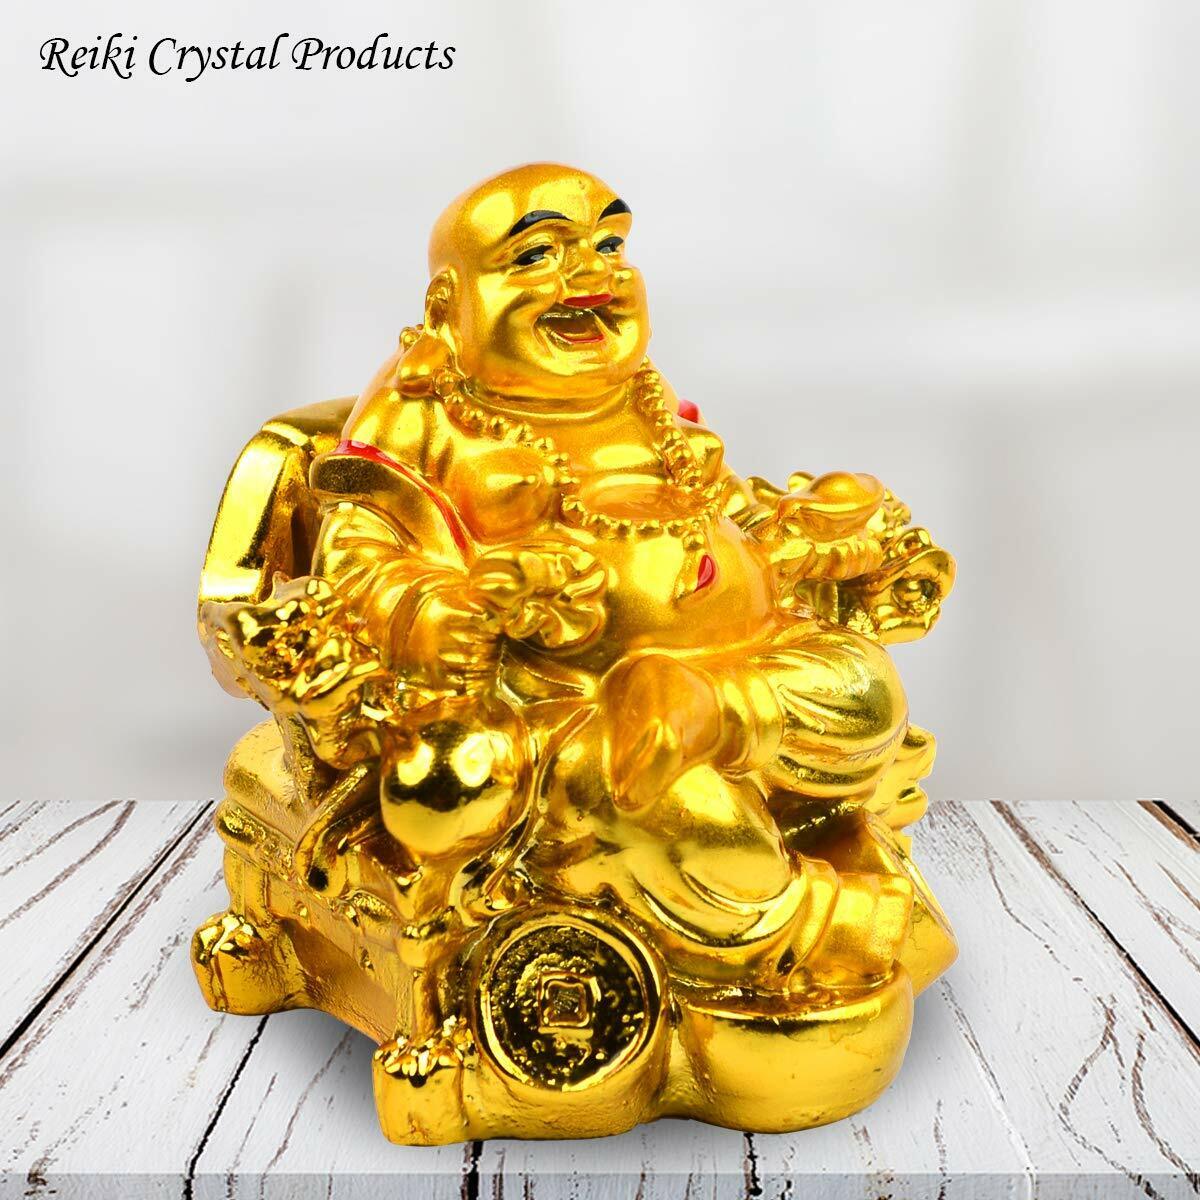 Feng Shui Laughing Buddha On Chair with Ingot and Money Coin for Health,  Wealth | eBay